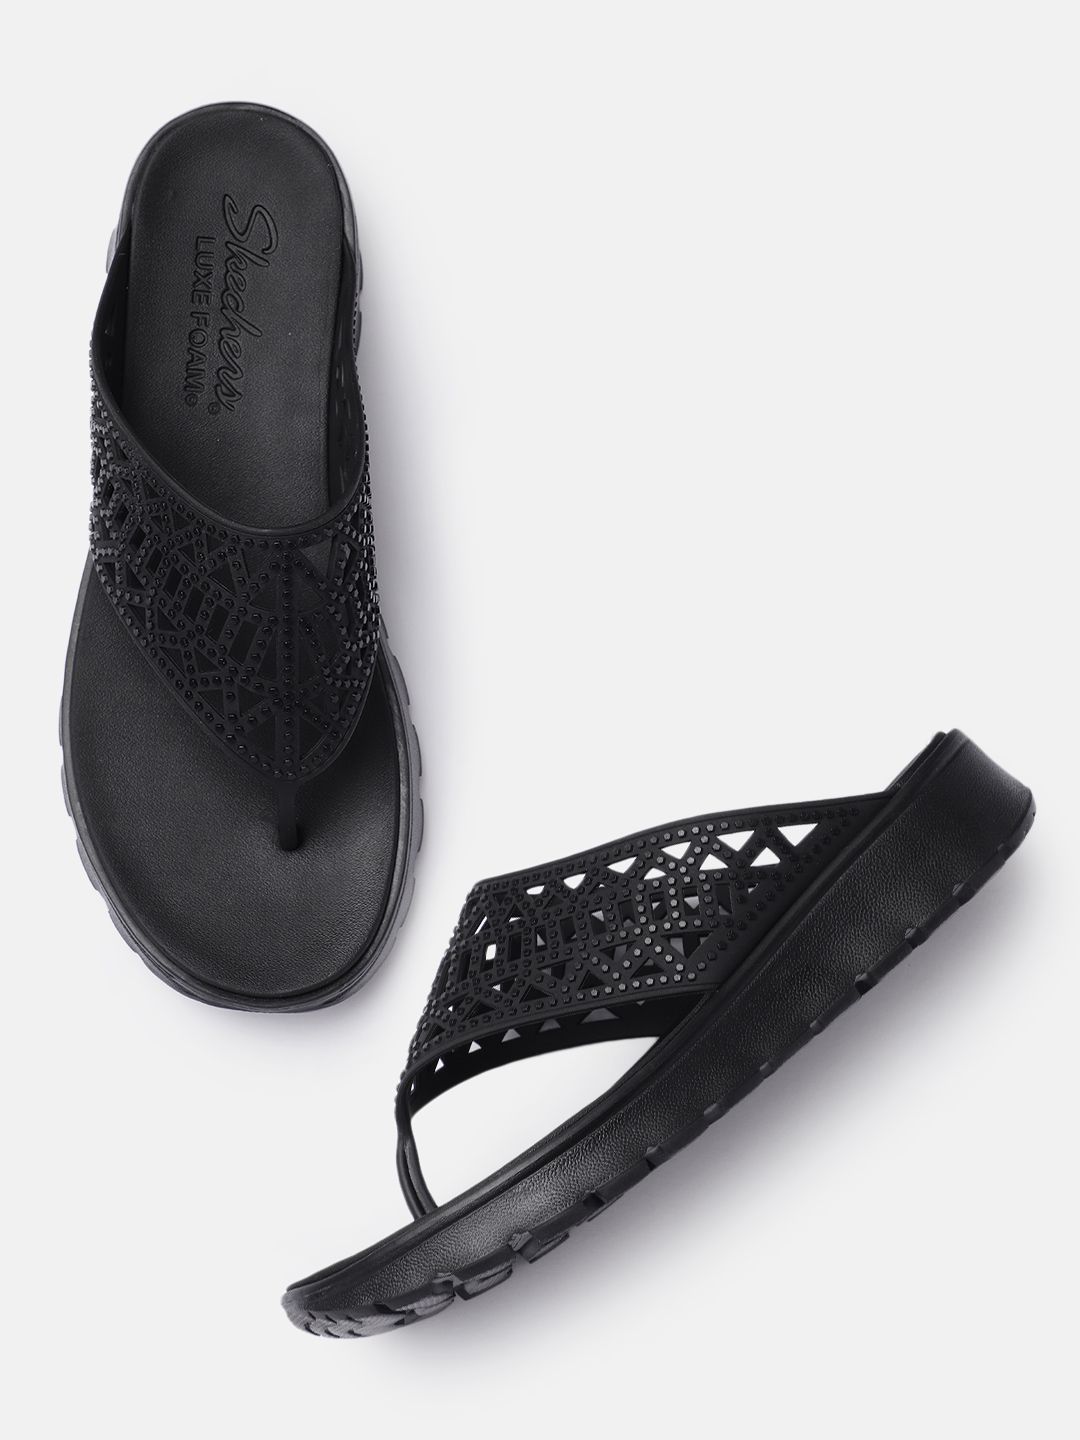 Skechers Women Black Embellished T-Strap Flats Price in India